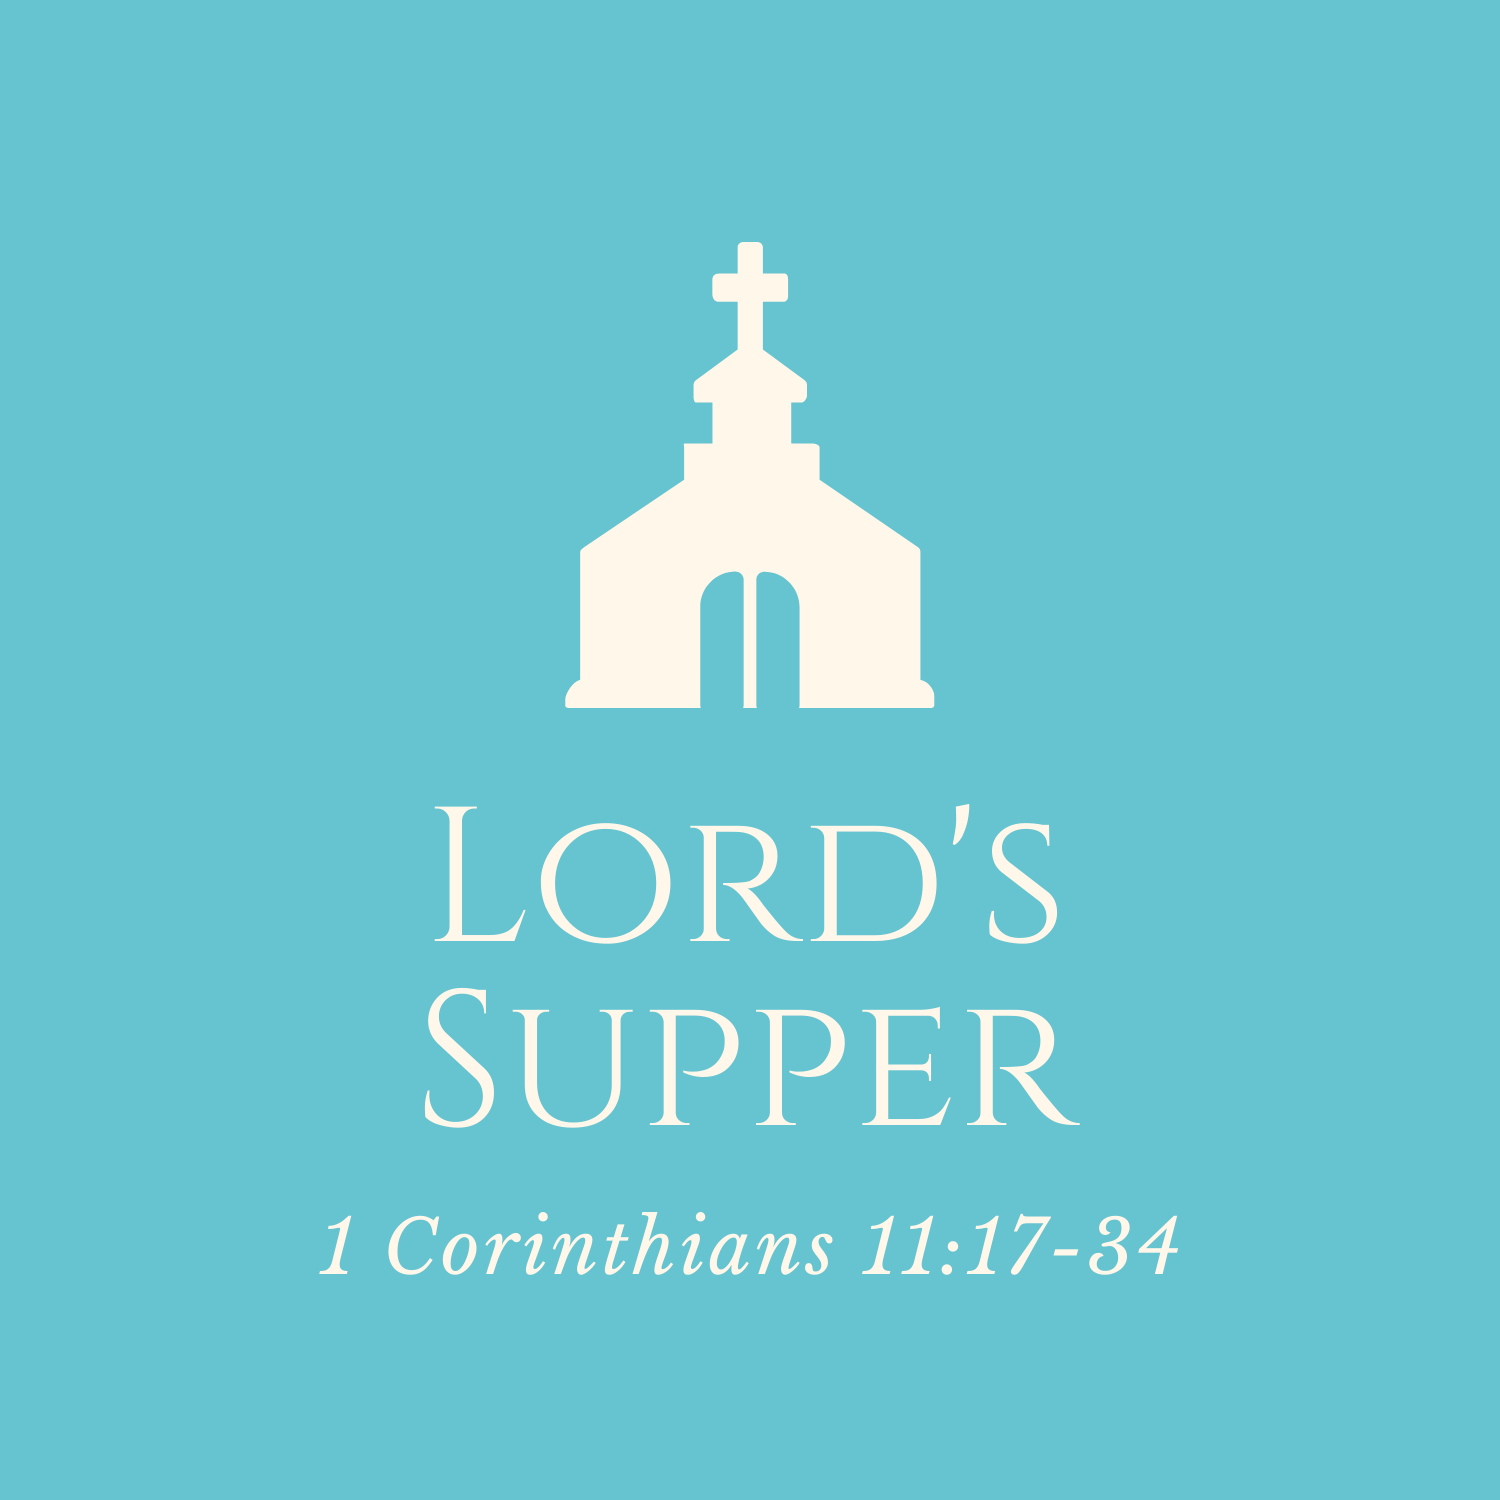 1 Corinthians 11:17-34 - Lord's Supper